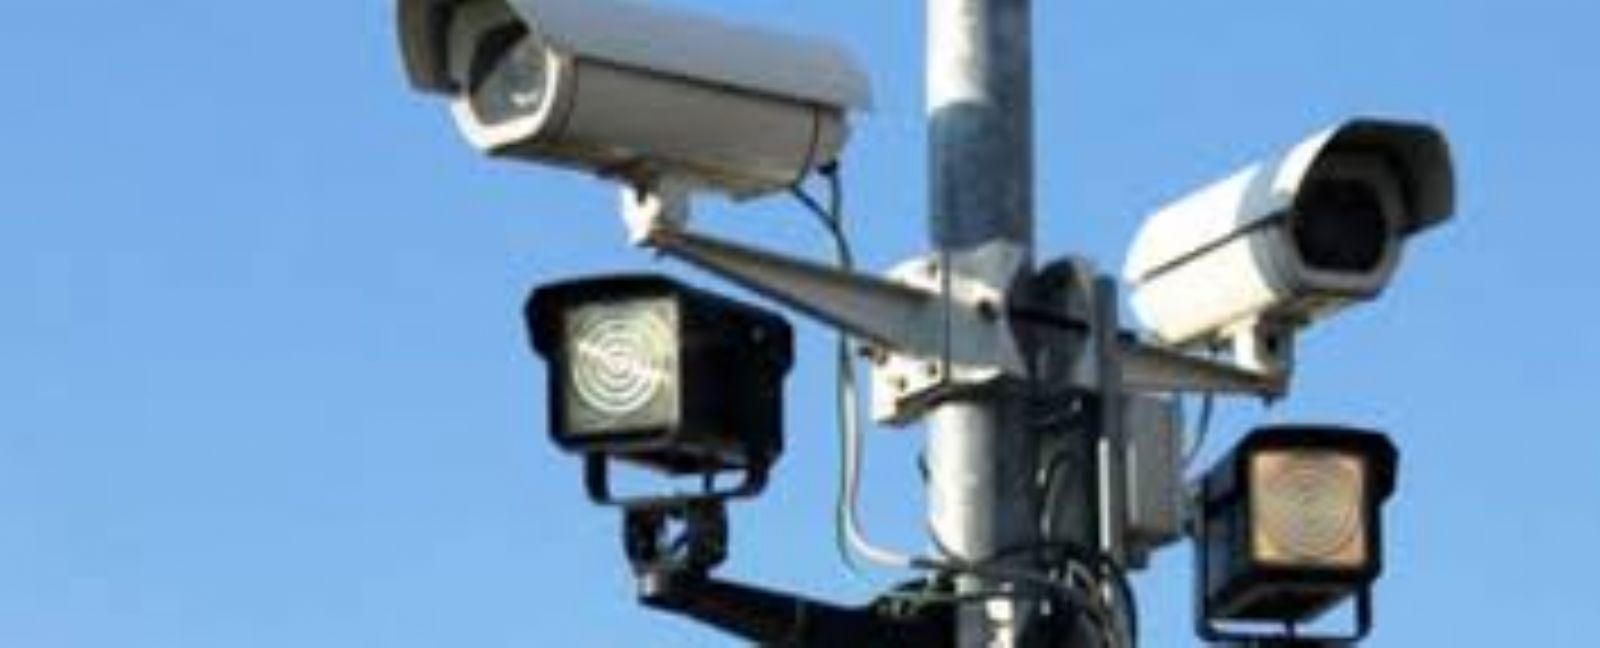 Report: Israel expands network surveillance cameras in the West Bank